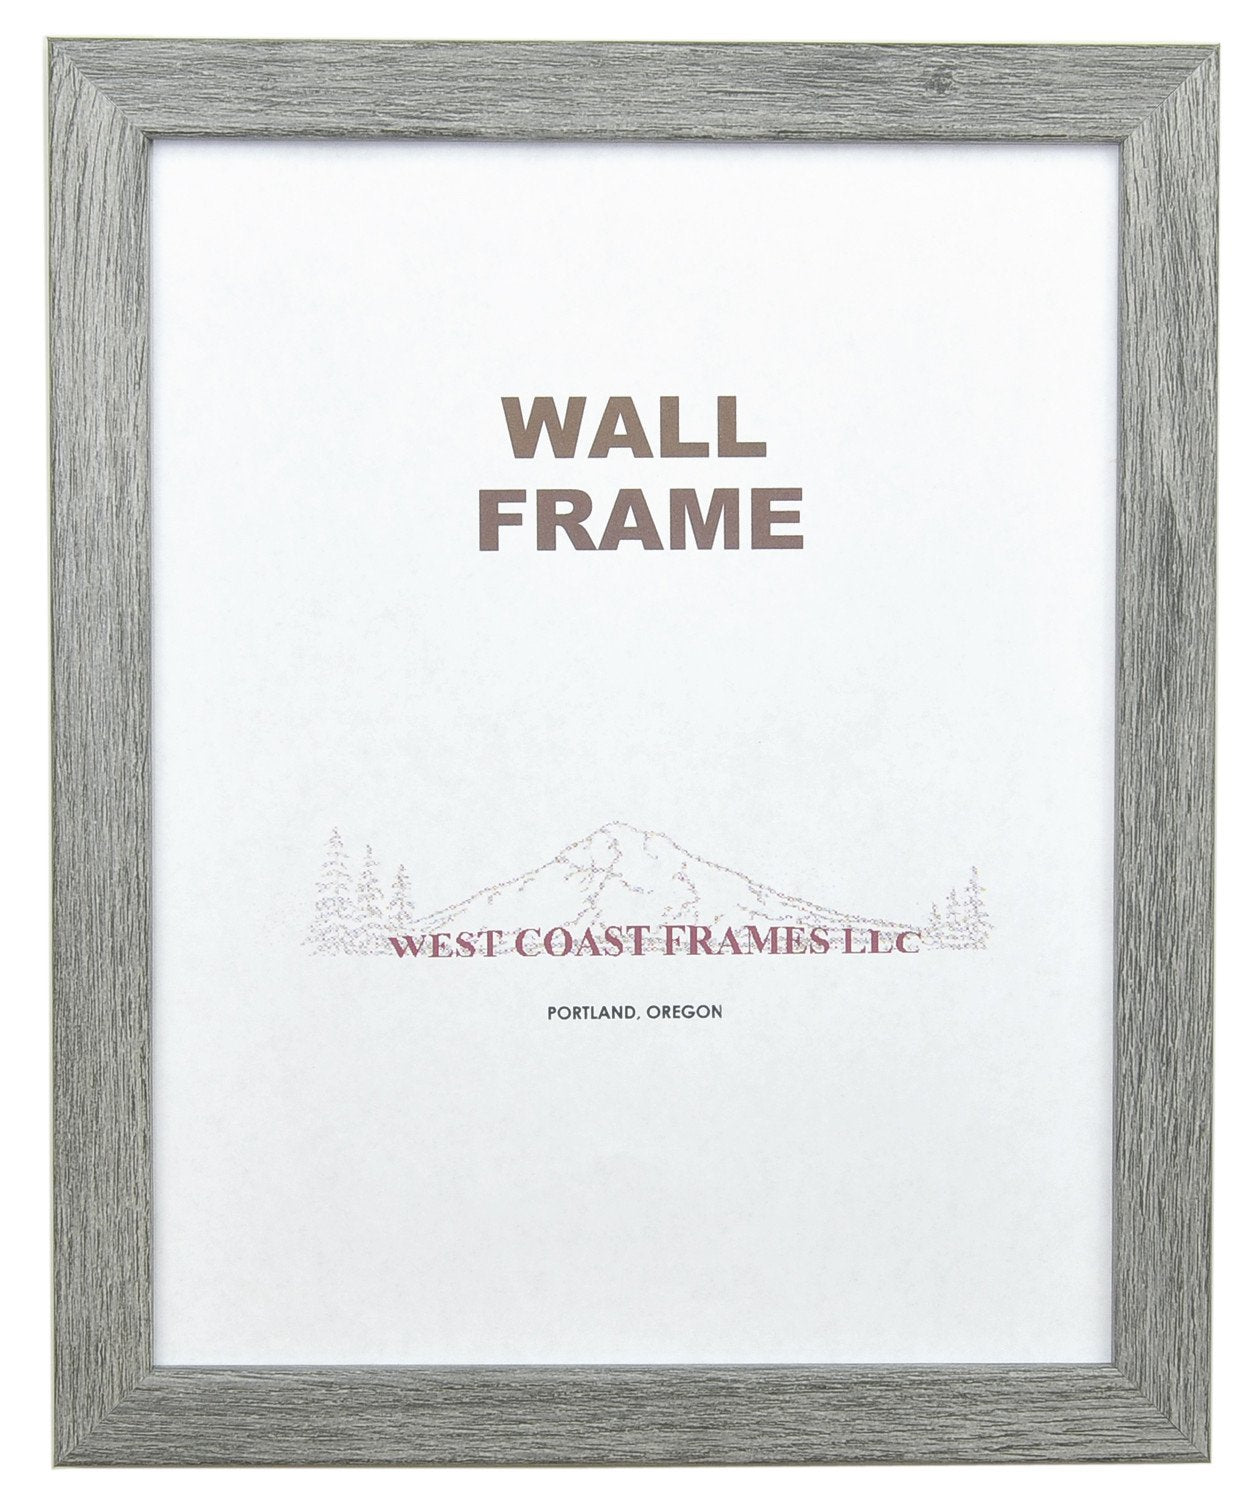 Picture Frame Multiple Colors - Black 72079 - Gray 72030 - White 72021 - Gold 72054 - MADE IN USA